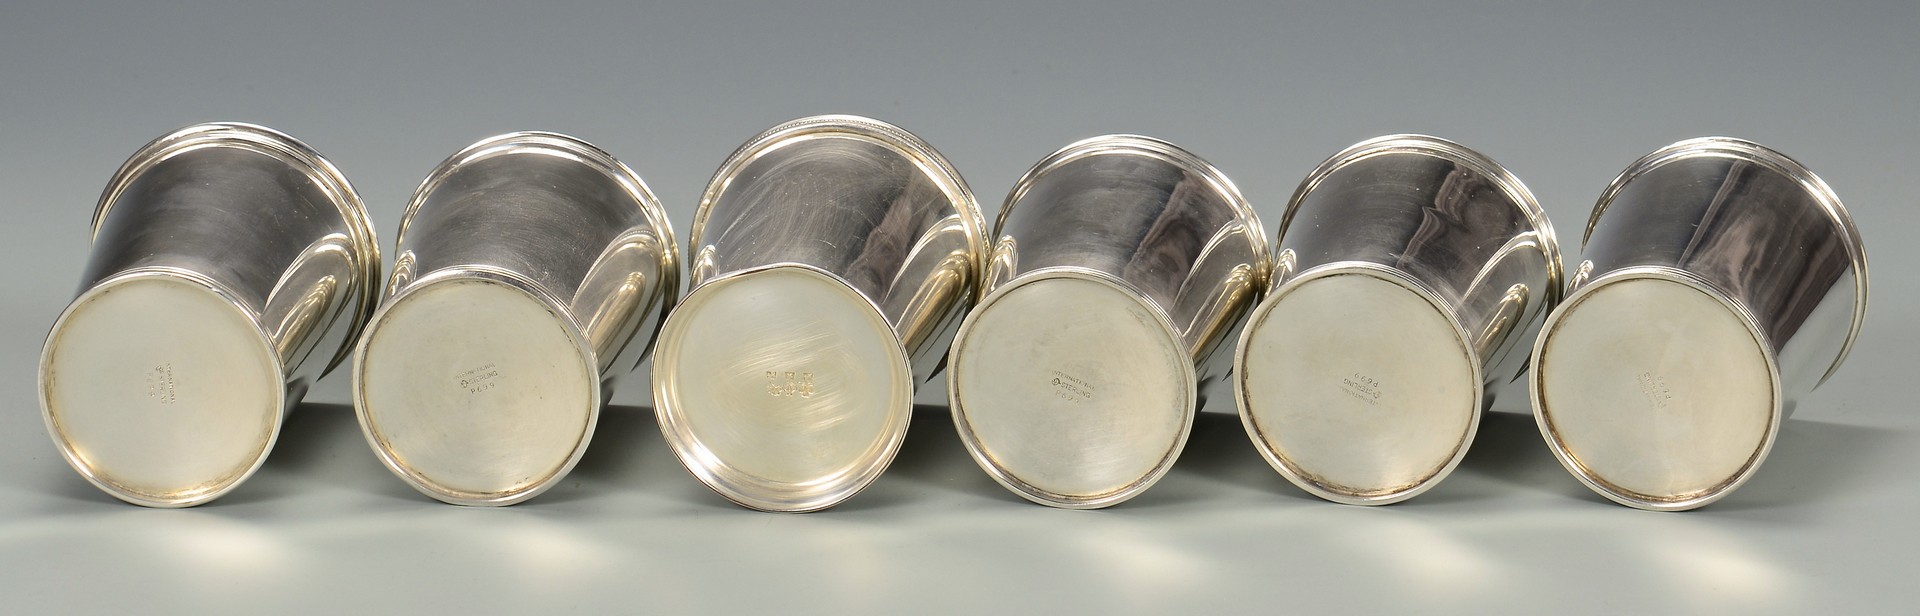 Lot 814: 5 Sterling Silver Julep Cups